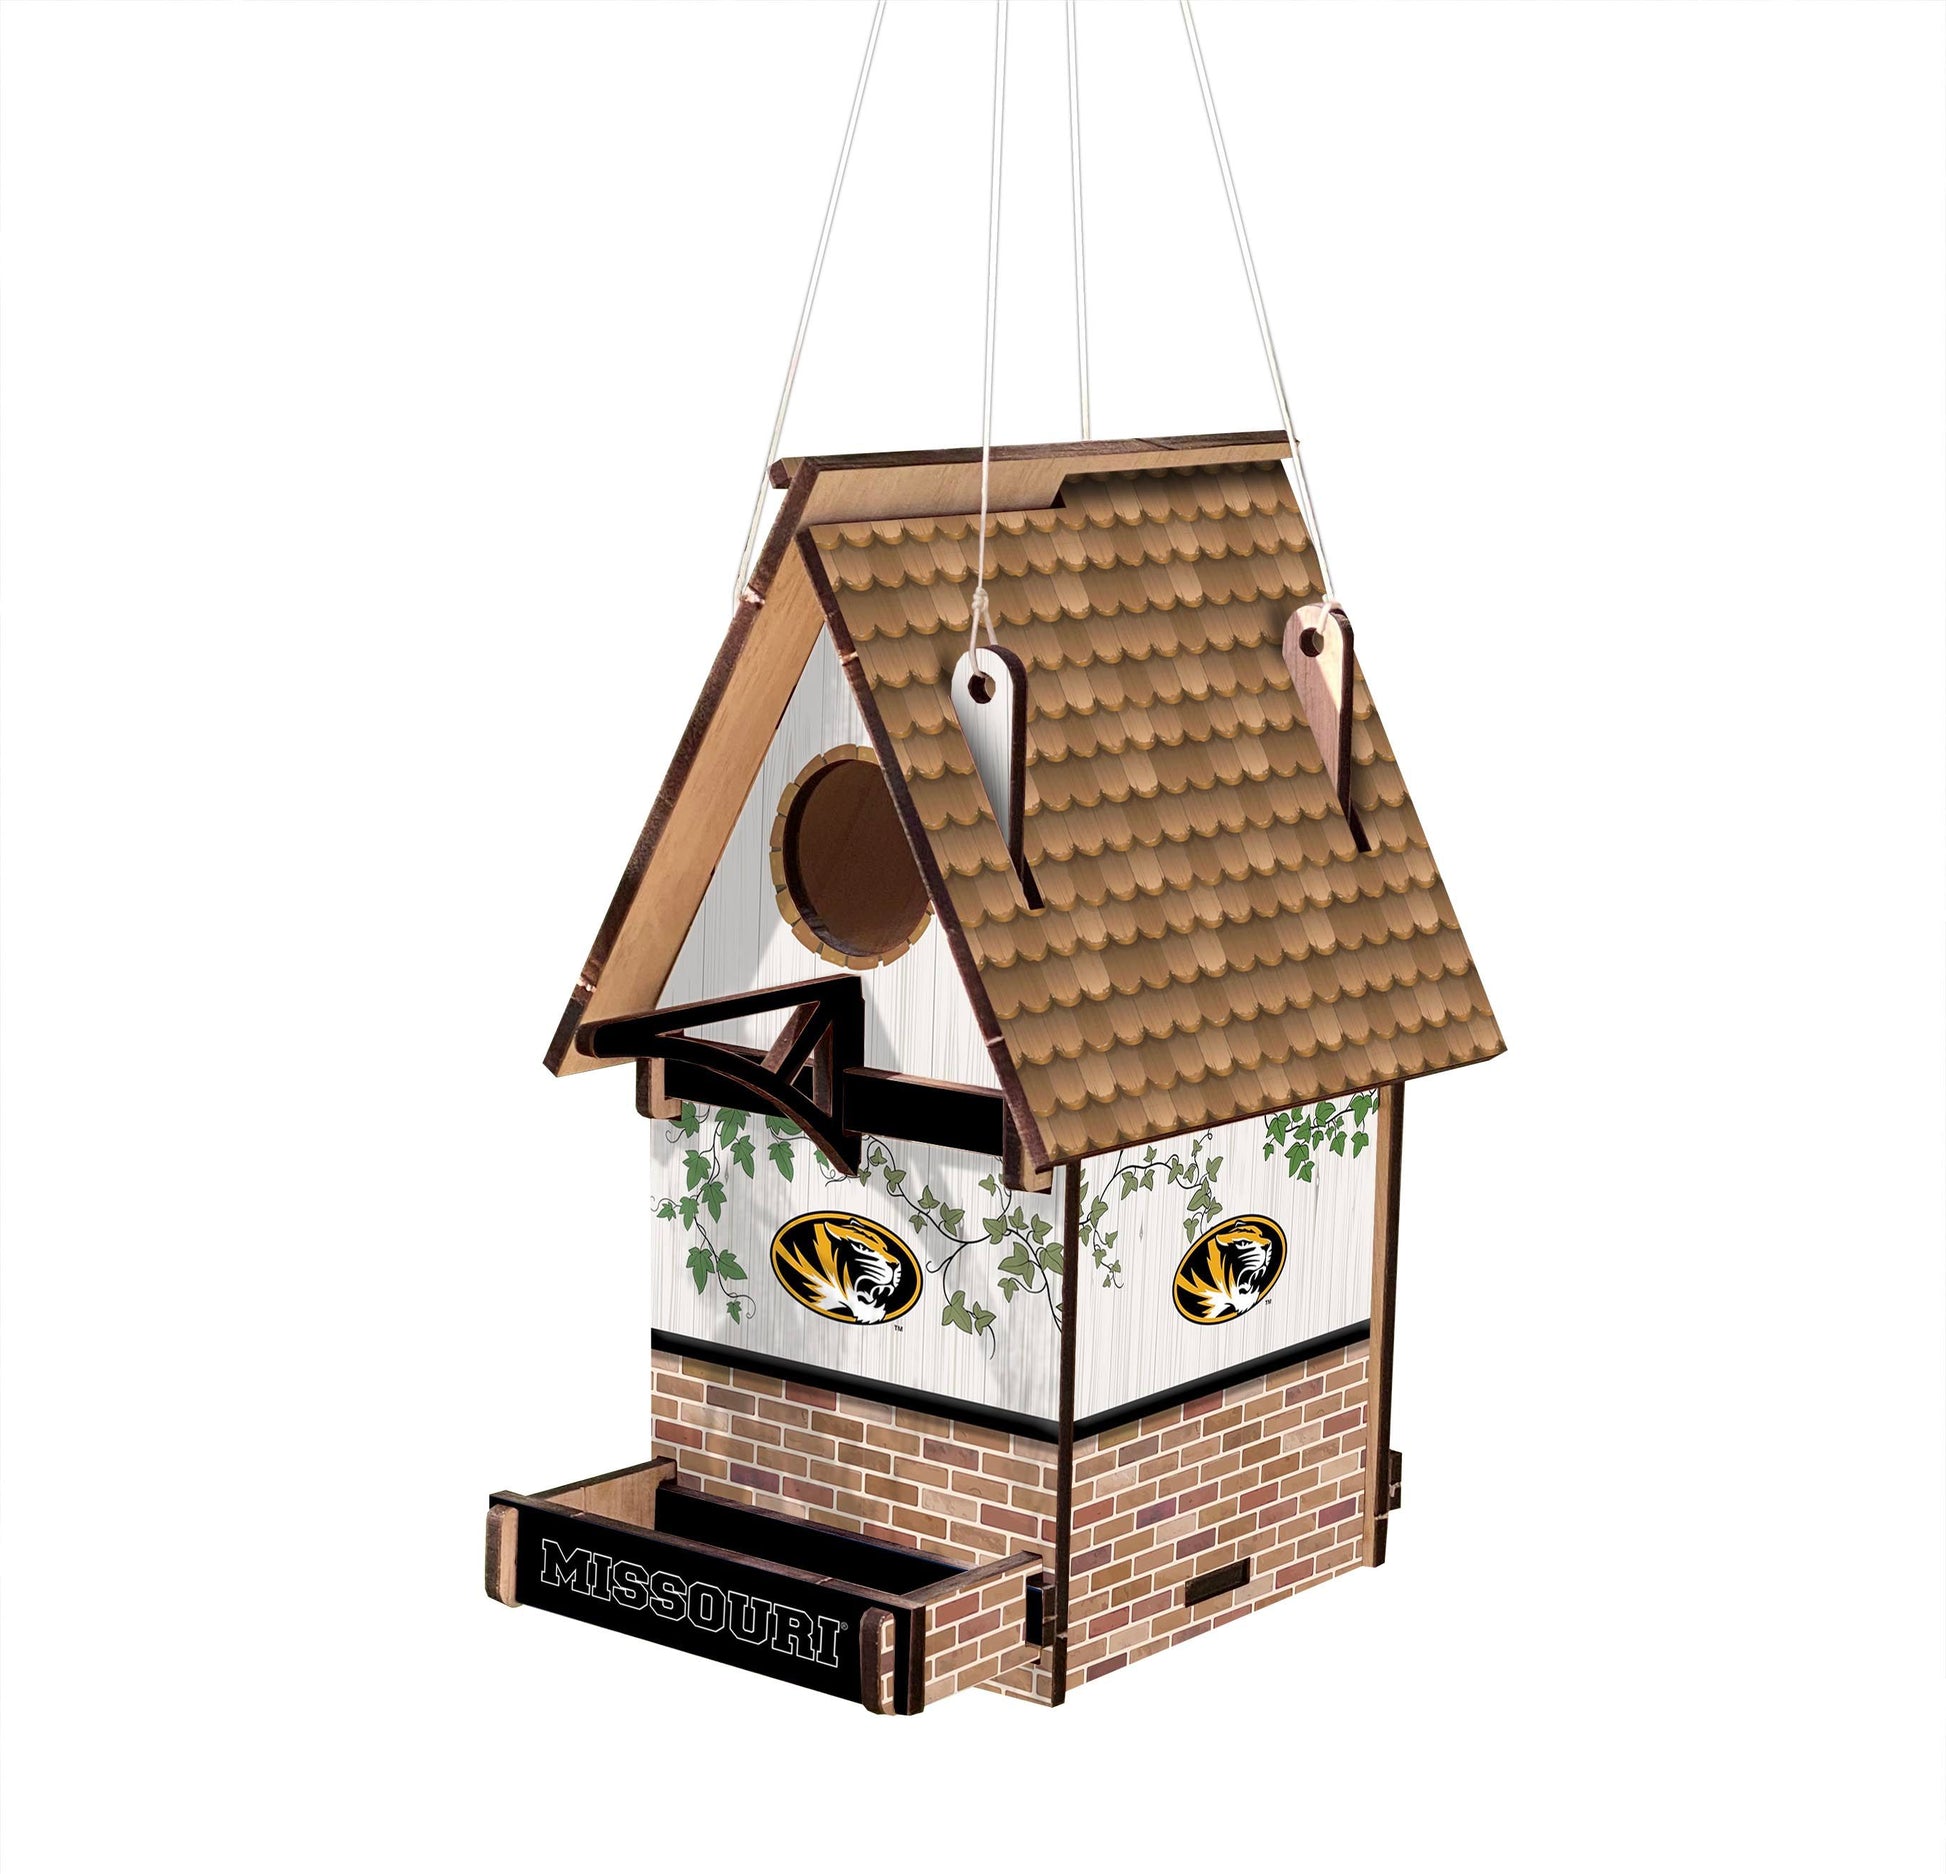 Show your support and love for birds with this Missouri Tigers NCAA Wood Birdhouse. Made with MDF, it features team graphics and colors to show your Missouri Tigers team spirit. With its 15" x 15" size.